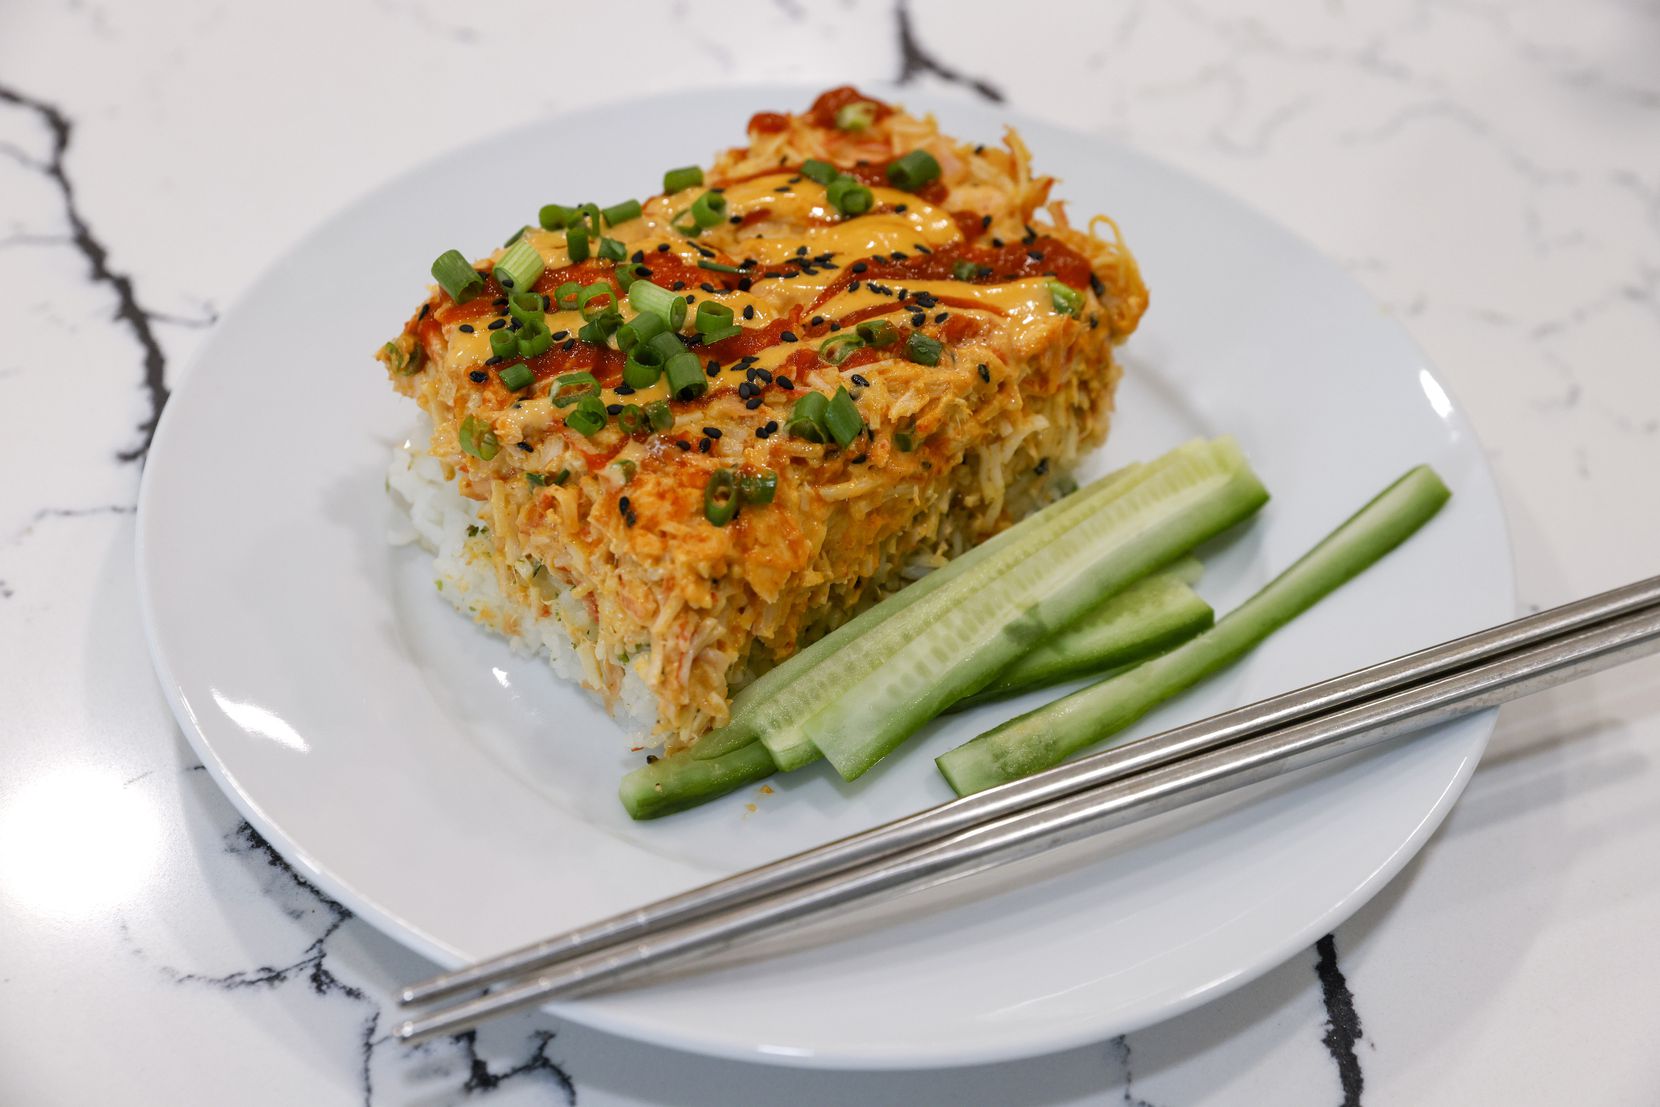 A piece of sushi bake, a casserole of salmon, imitation crab and rice.